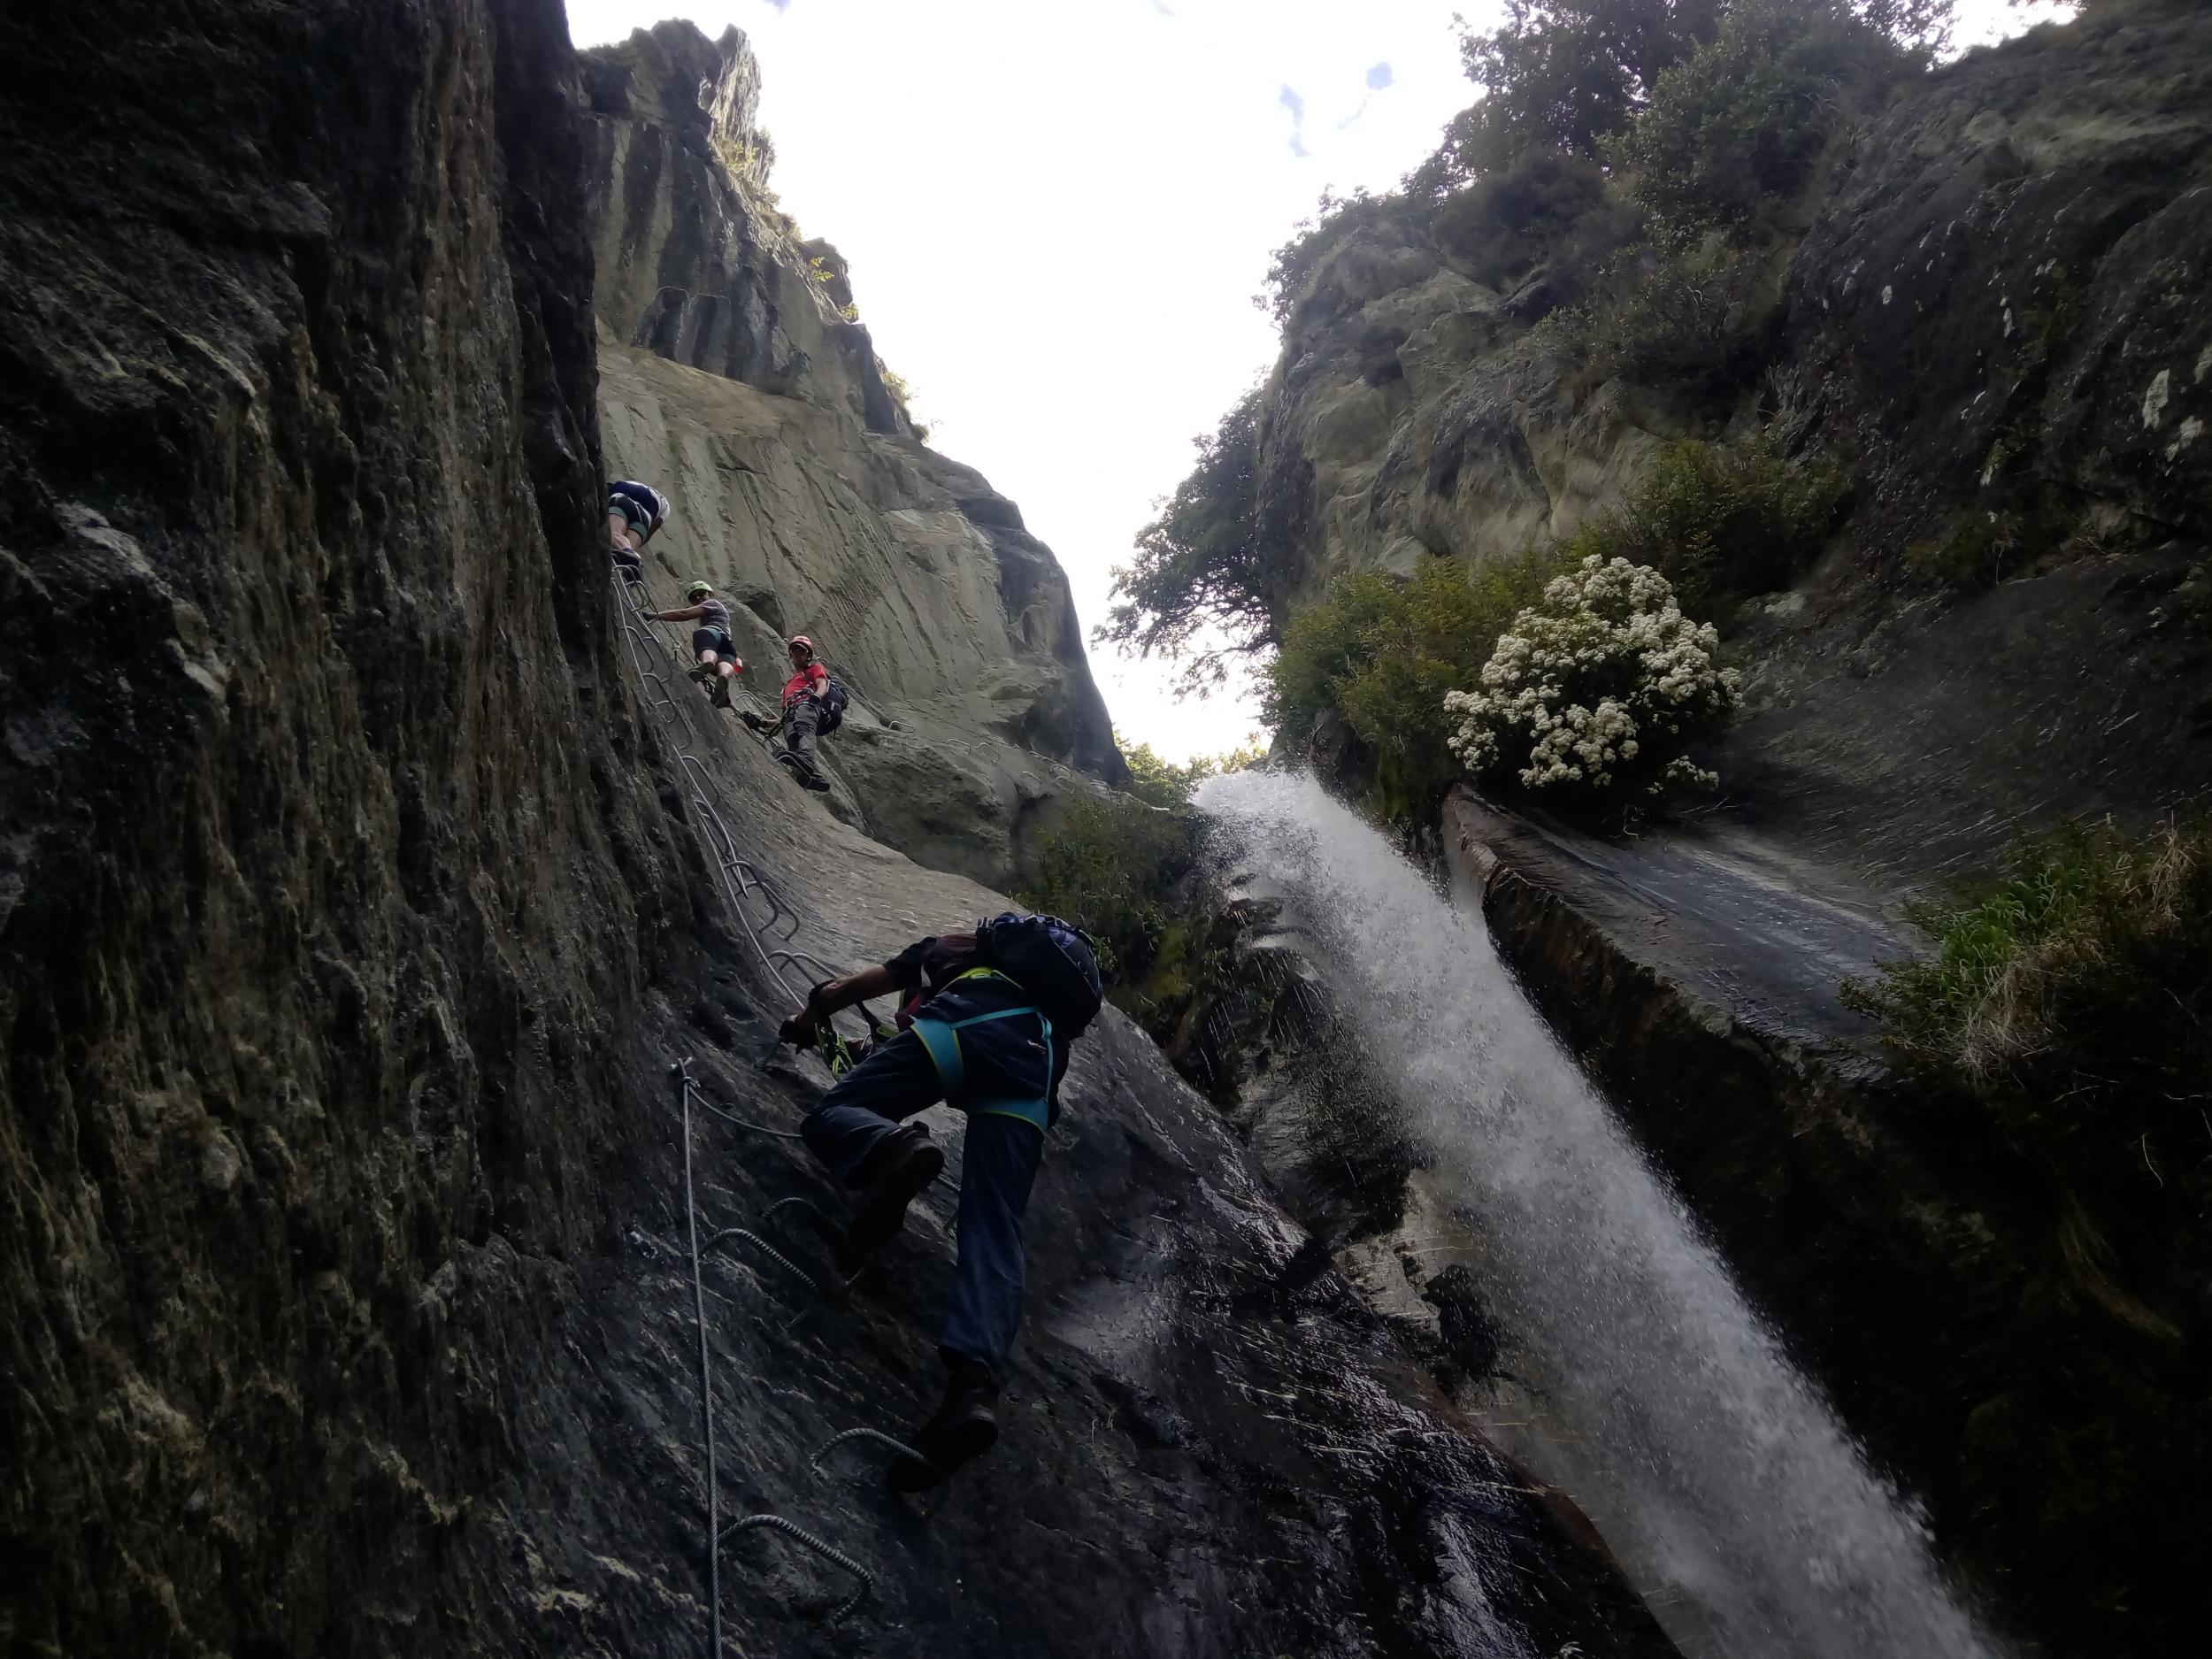 Get a rush: the climb passes right by the falls